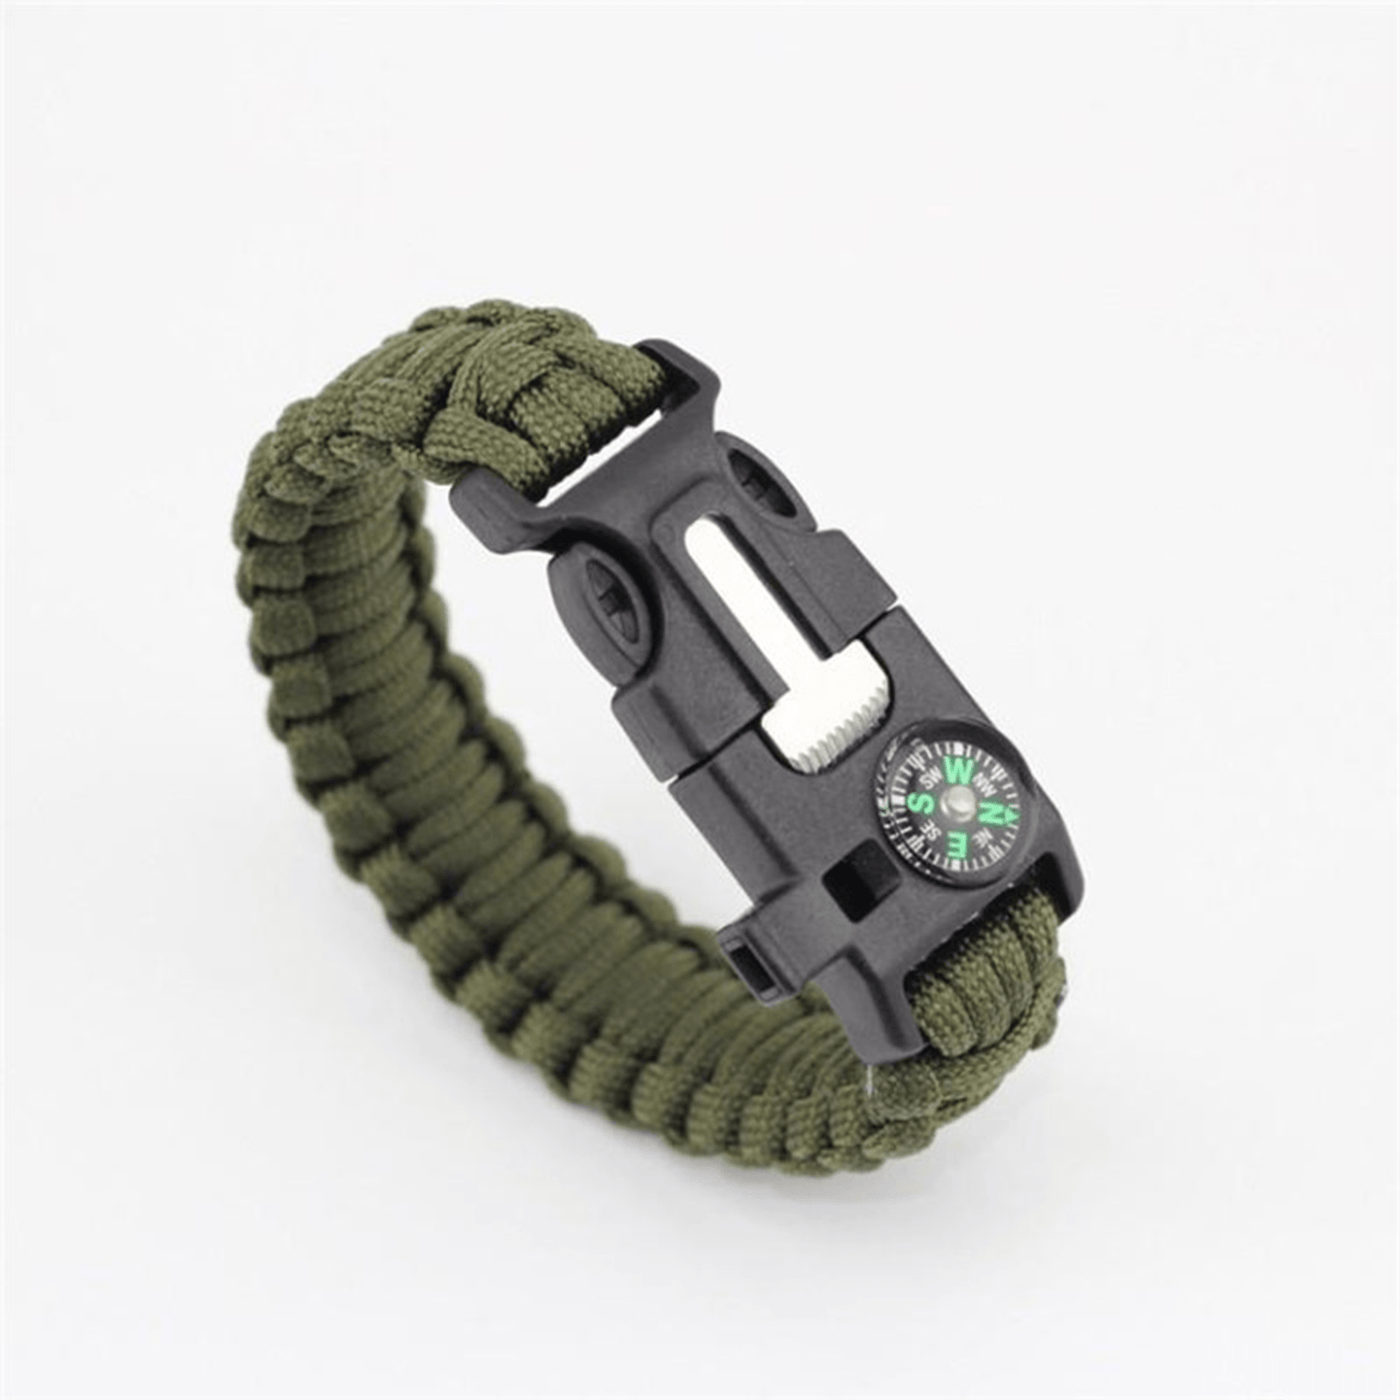 Amazon.com: MansWill Survival Bracelet, 5 in 1 New 7 Core Paracord  Emergency Sports Wristband Gear Kit Waterproof Compass, Rescue Whistle,  Fire Starter Multi-Tool Wilderness Adventure Accessories : Sports & Outdoors